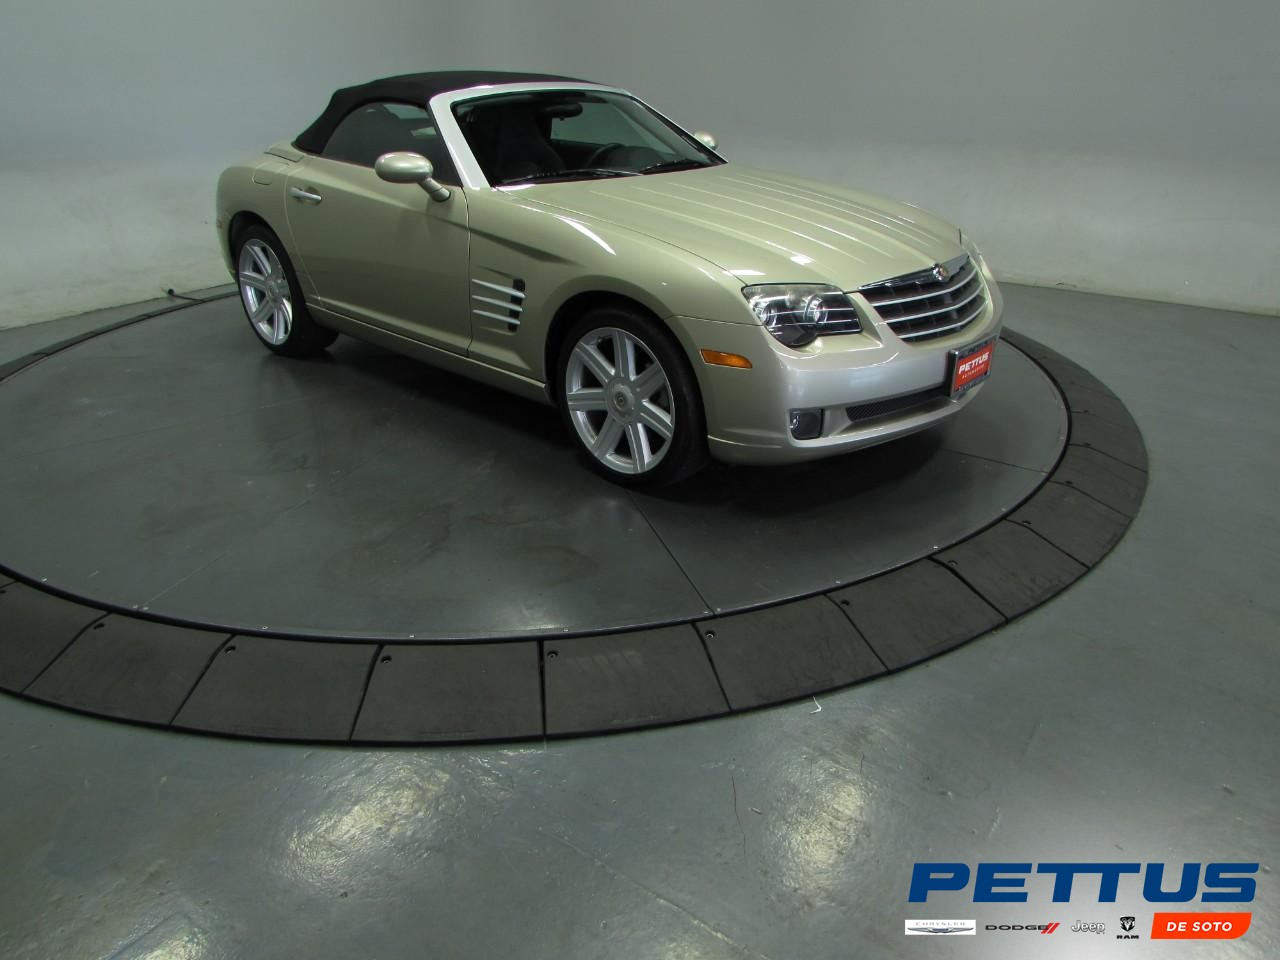 The 2006 Chrysler Crossfire Limited photos